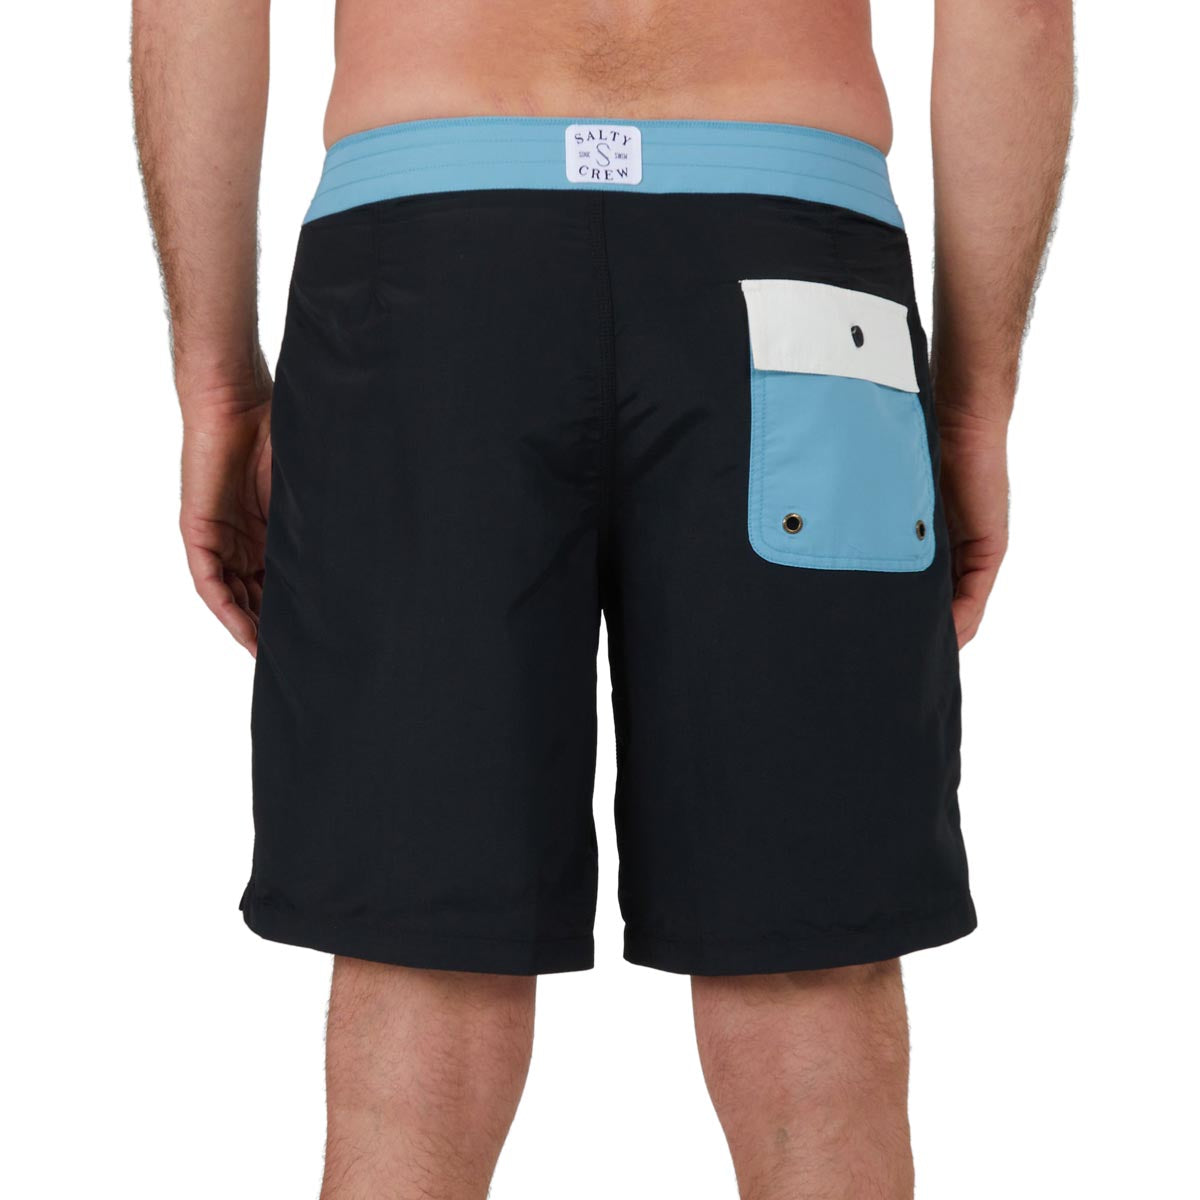 Salty Crew Clubhouse Board Shorts - Black image 3